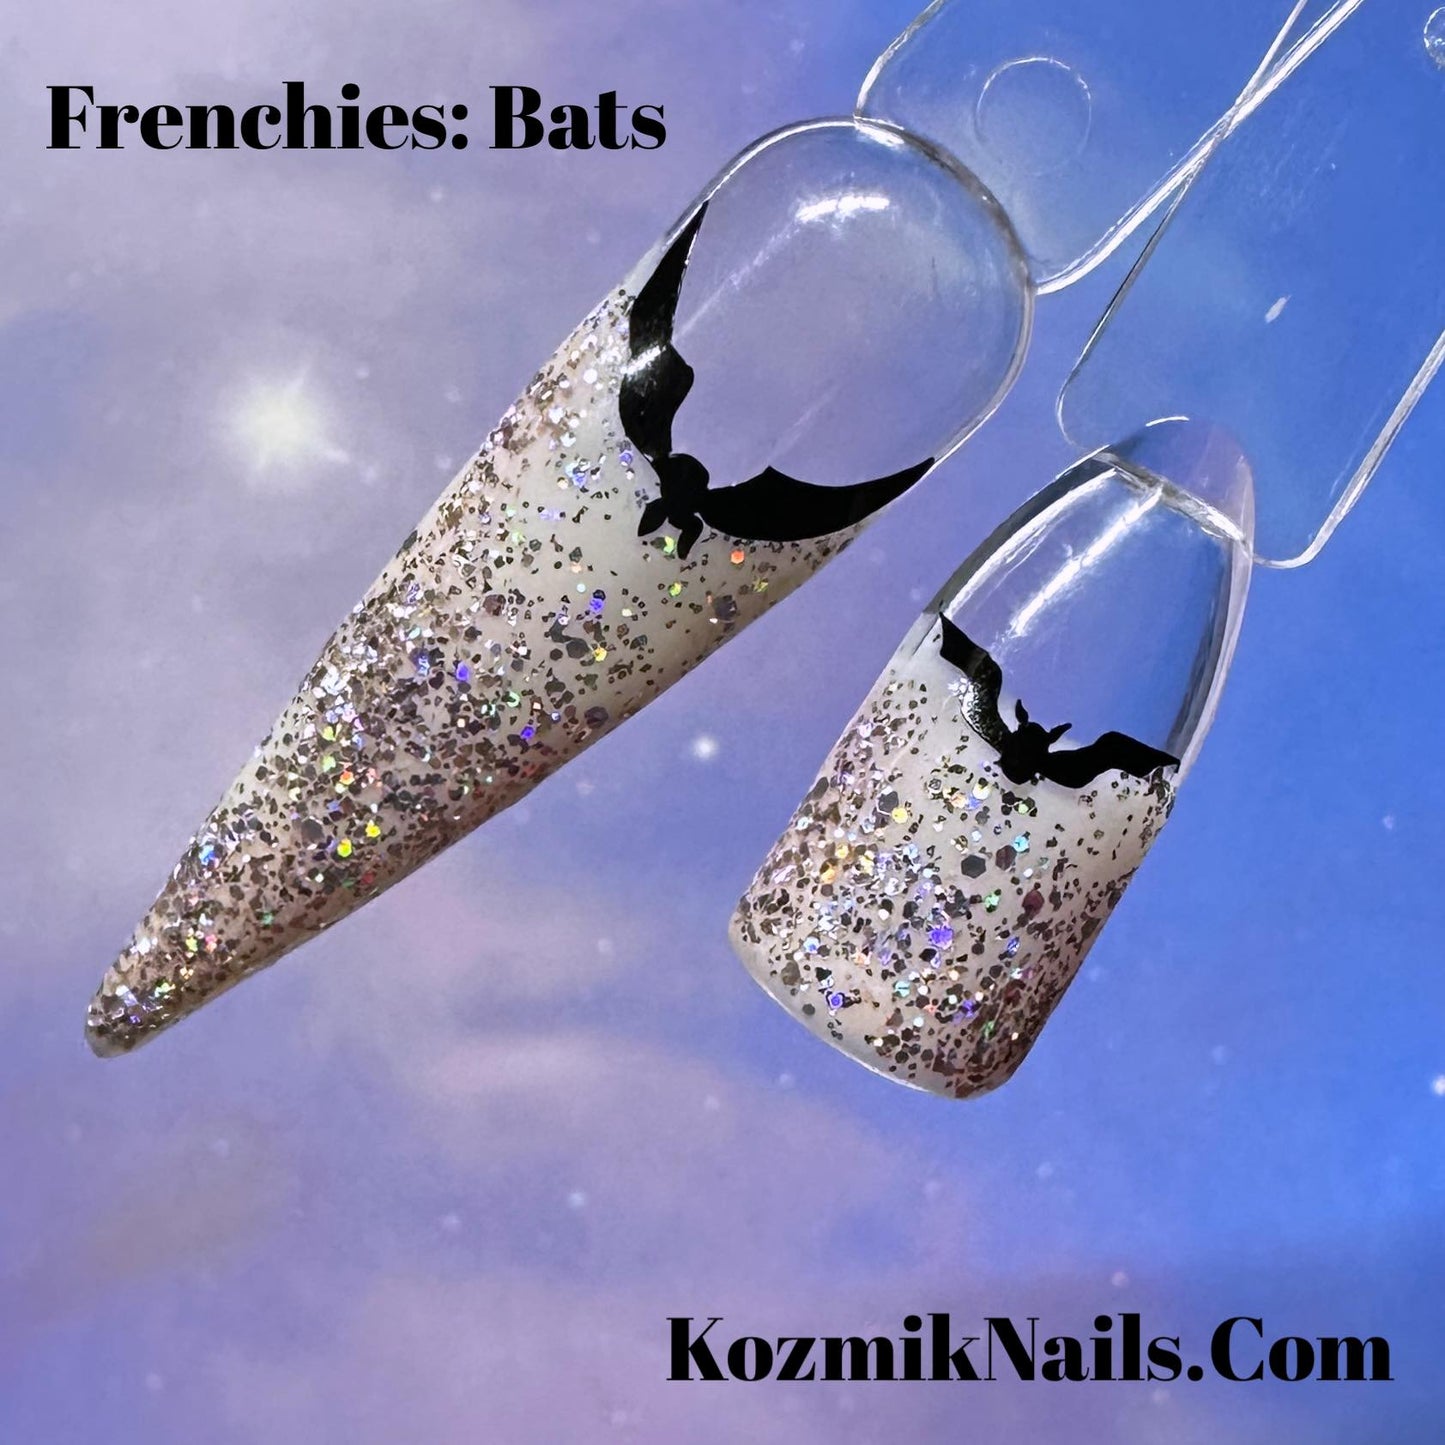 Frenchies: Bats